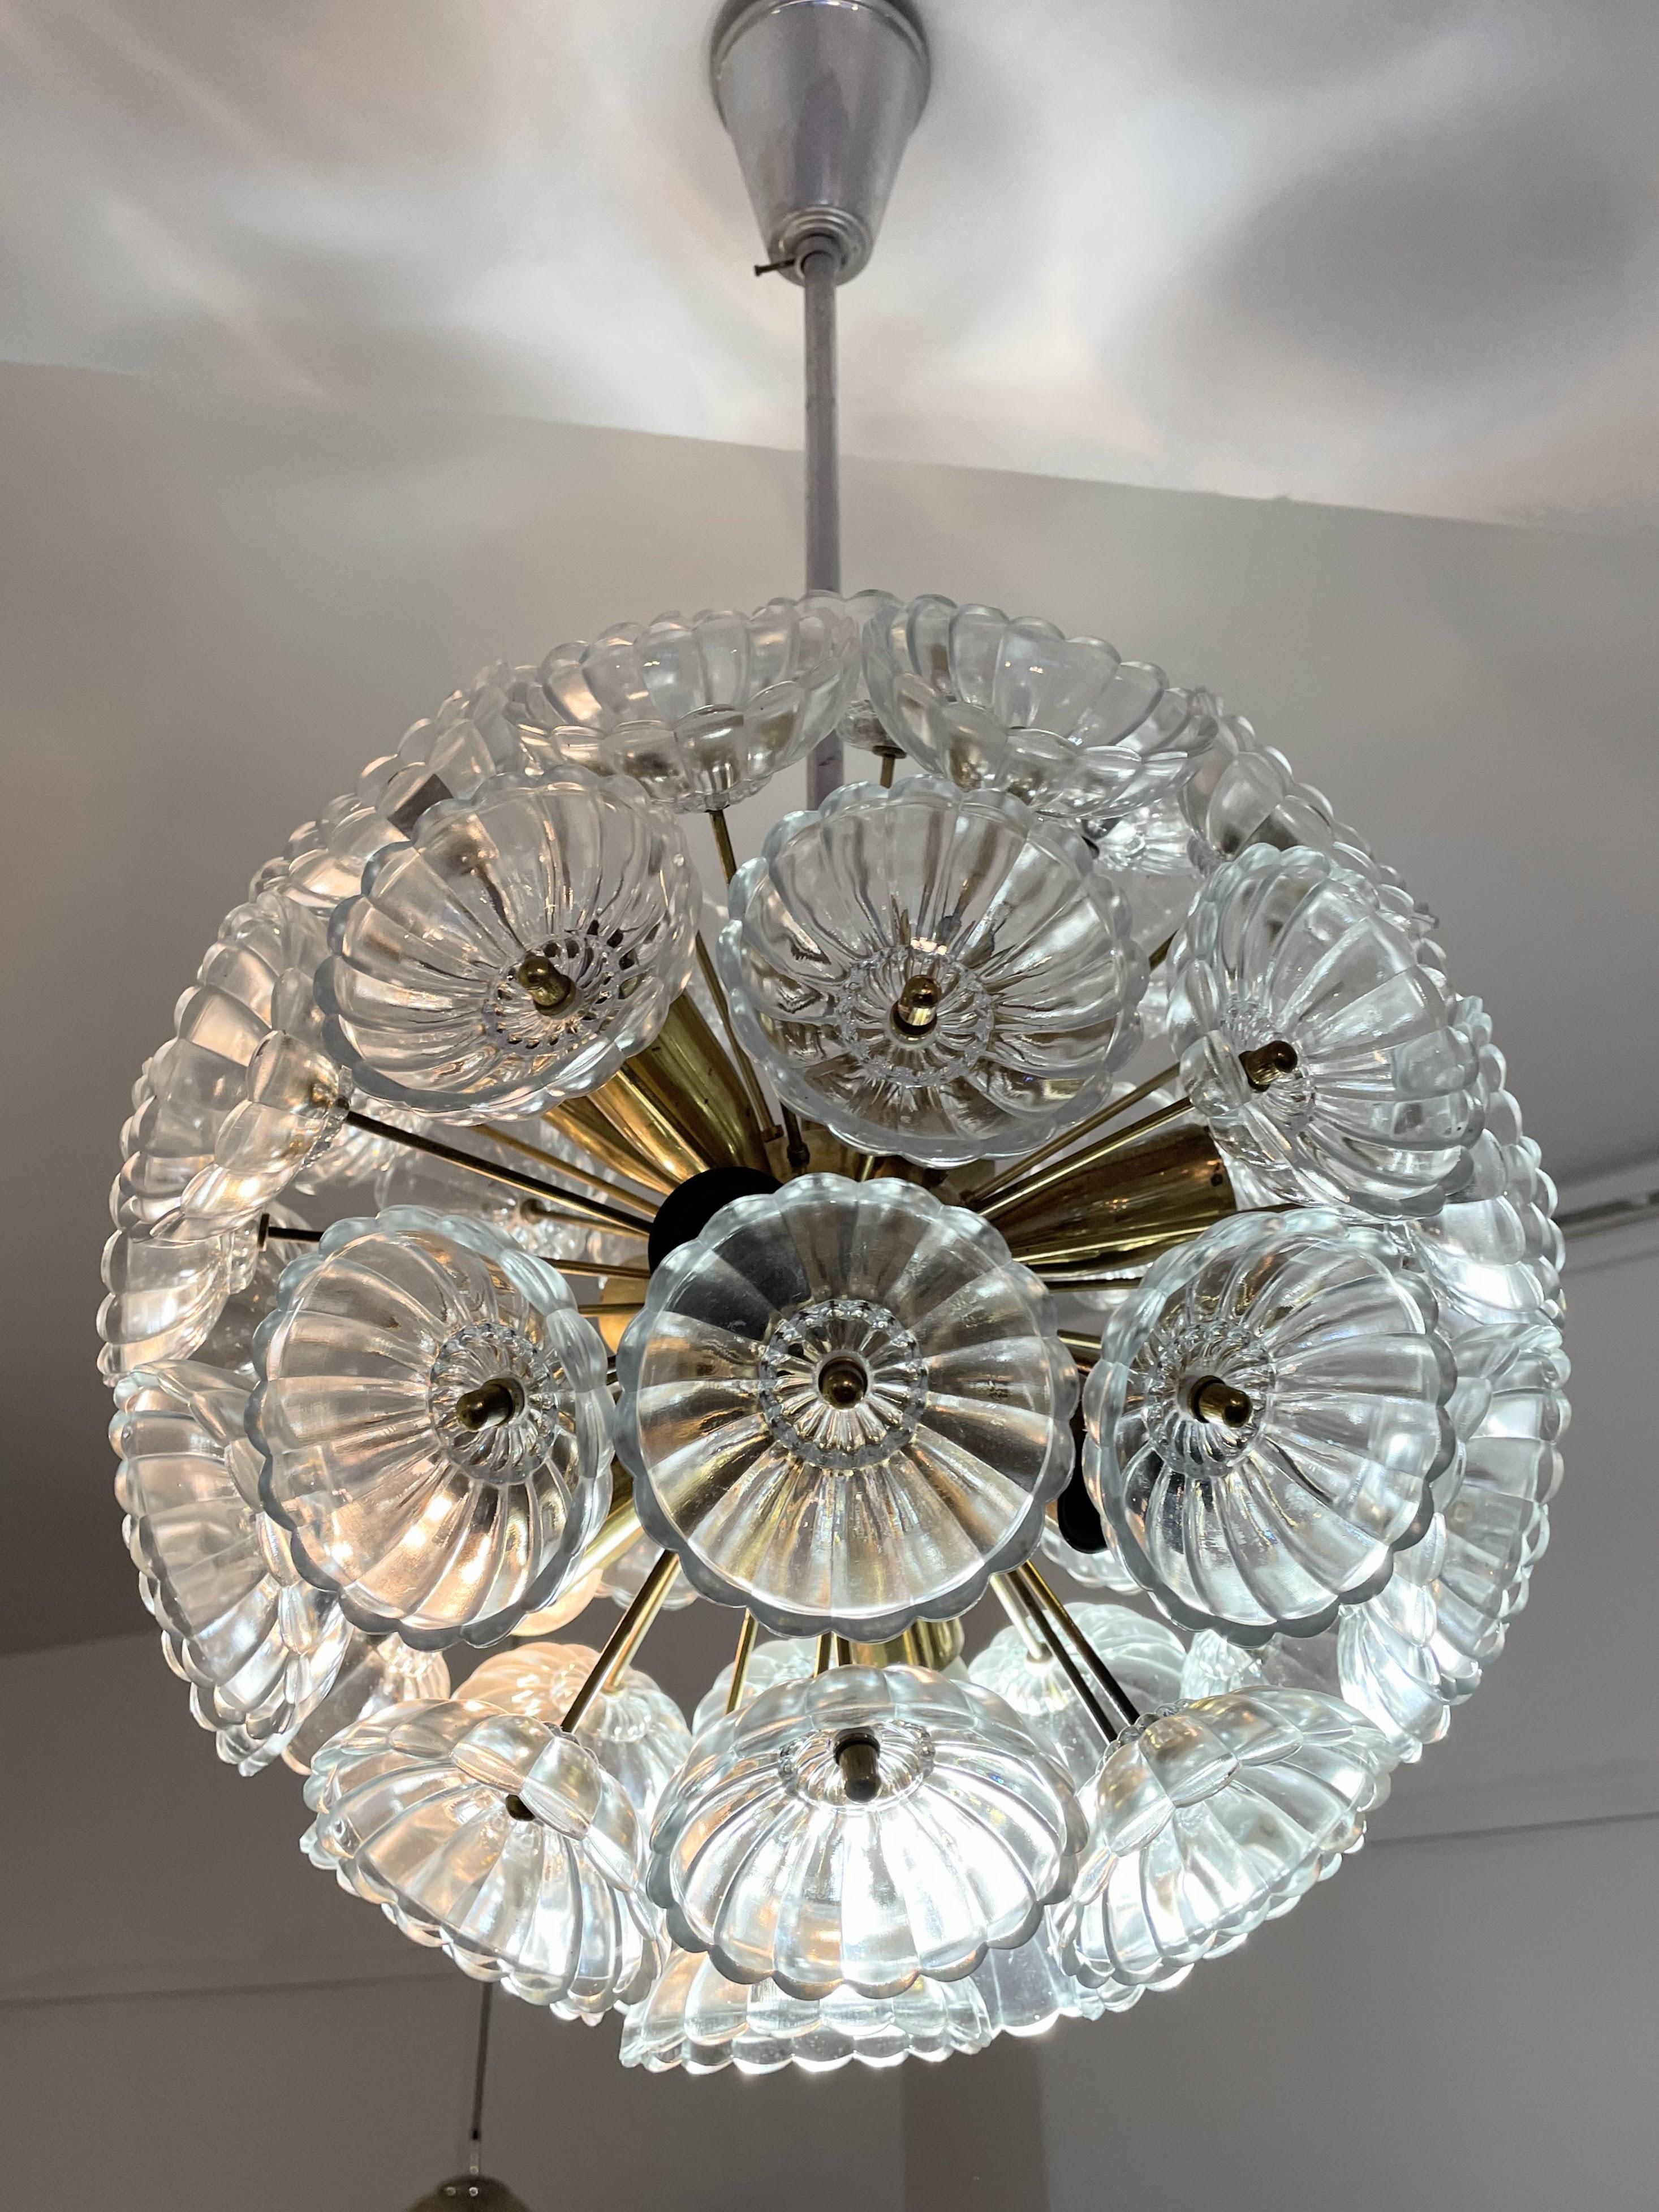 An exceptional vintage brass chandelier with 52 thick glass blossoms. This style light fixture previously hung in the Palace of the Republic in East Germany and is an extremely rare piece. The design is based on a Dandelion.
Requires 12, E14